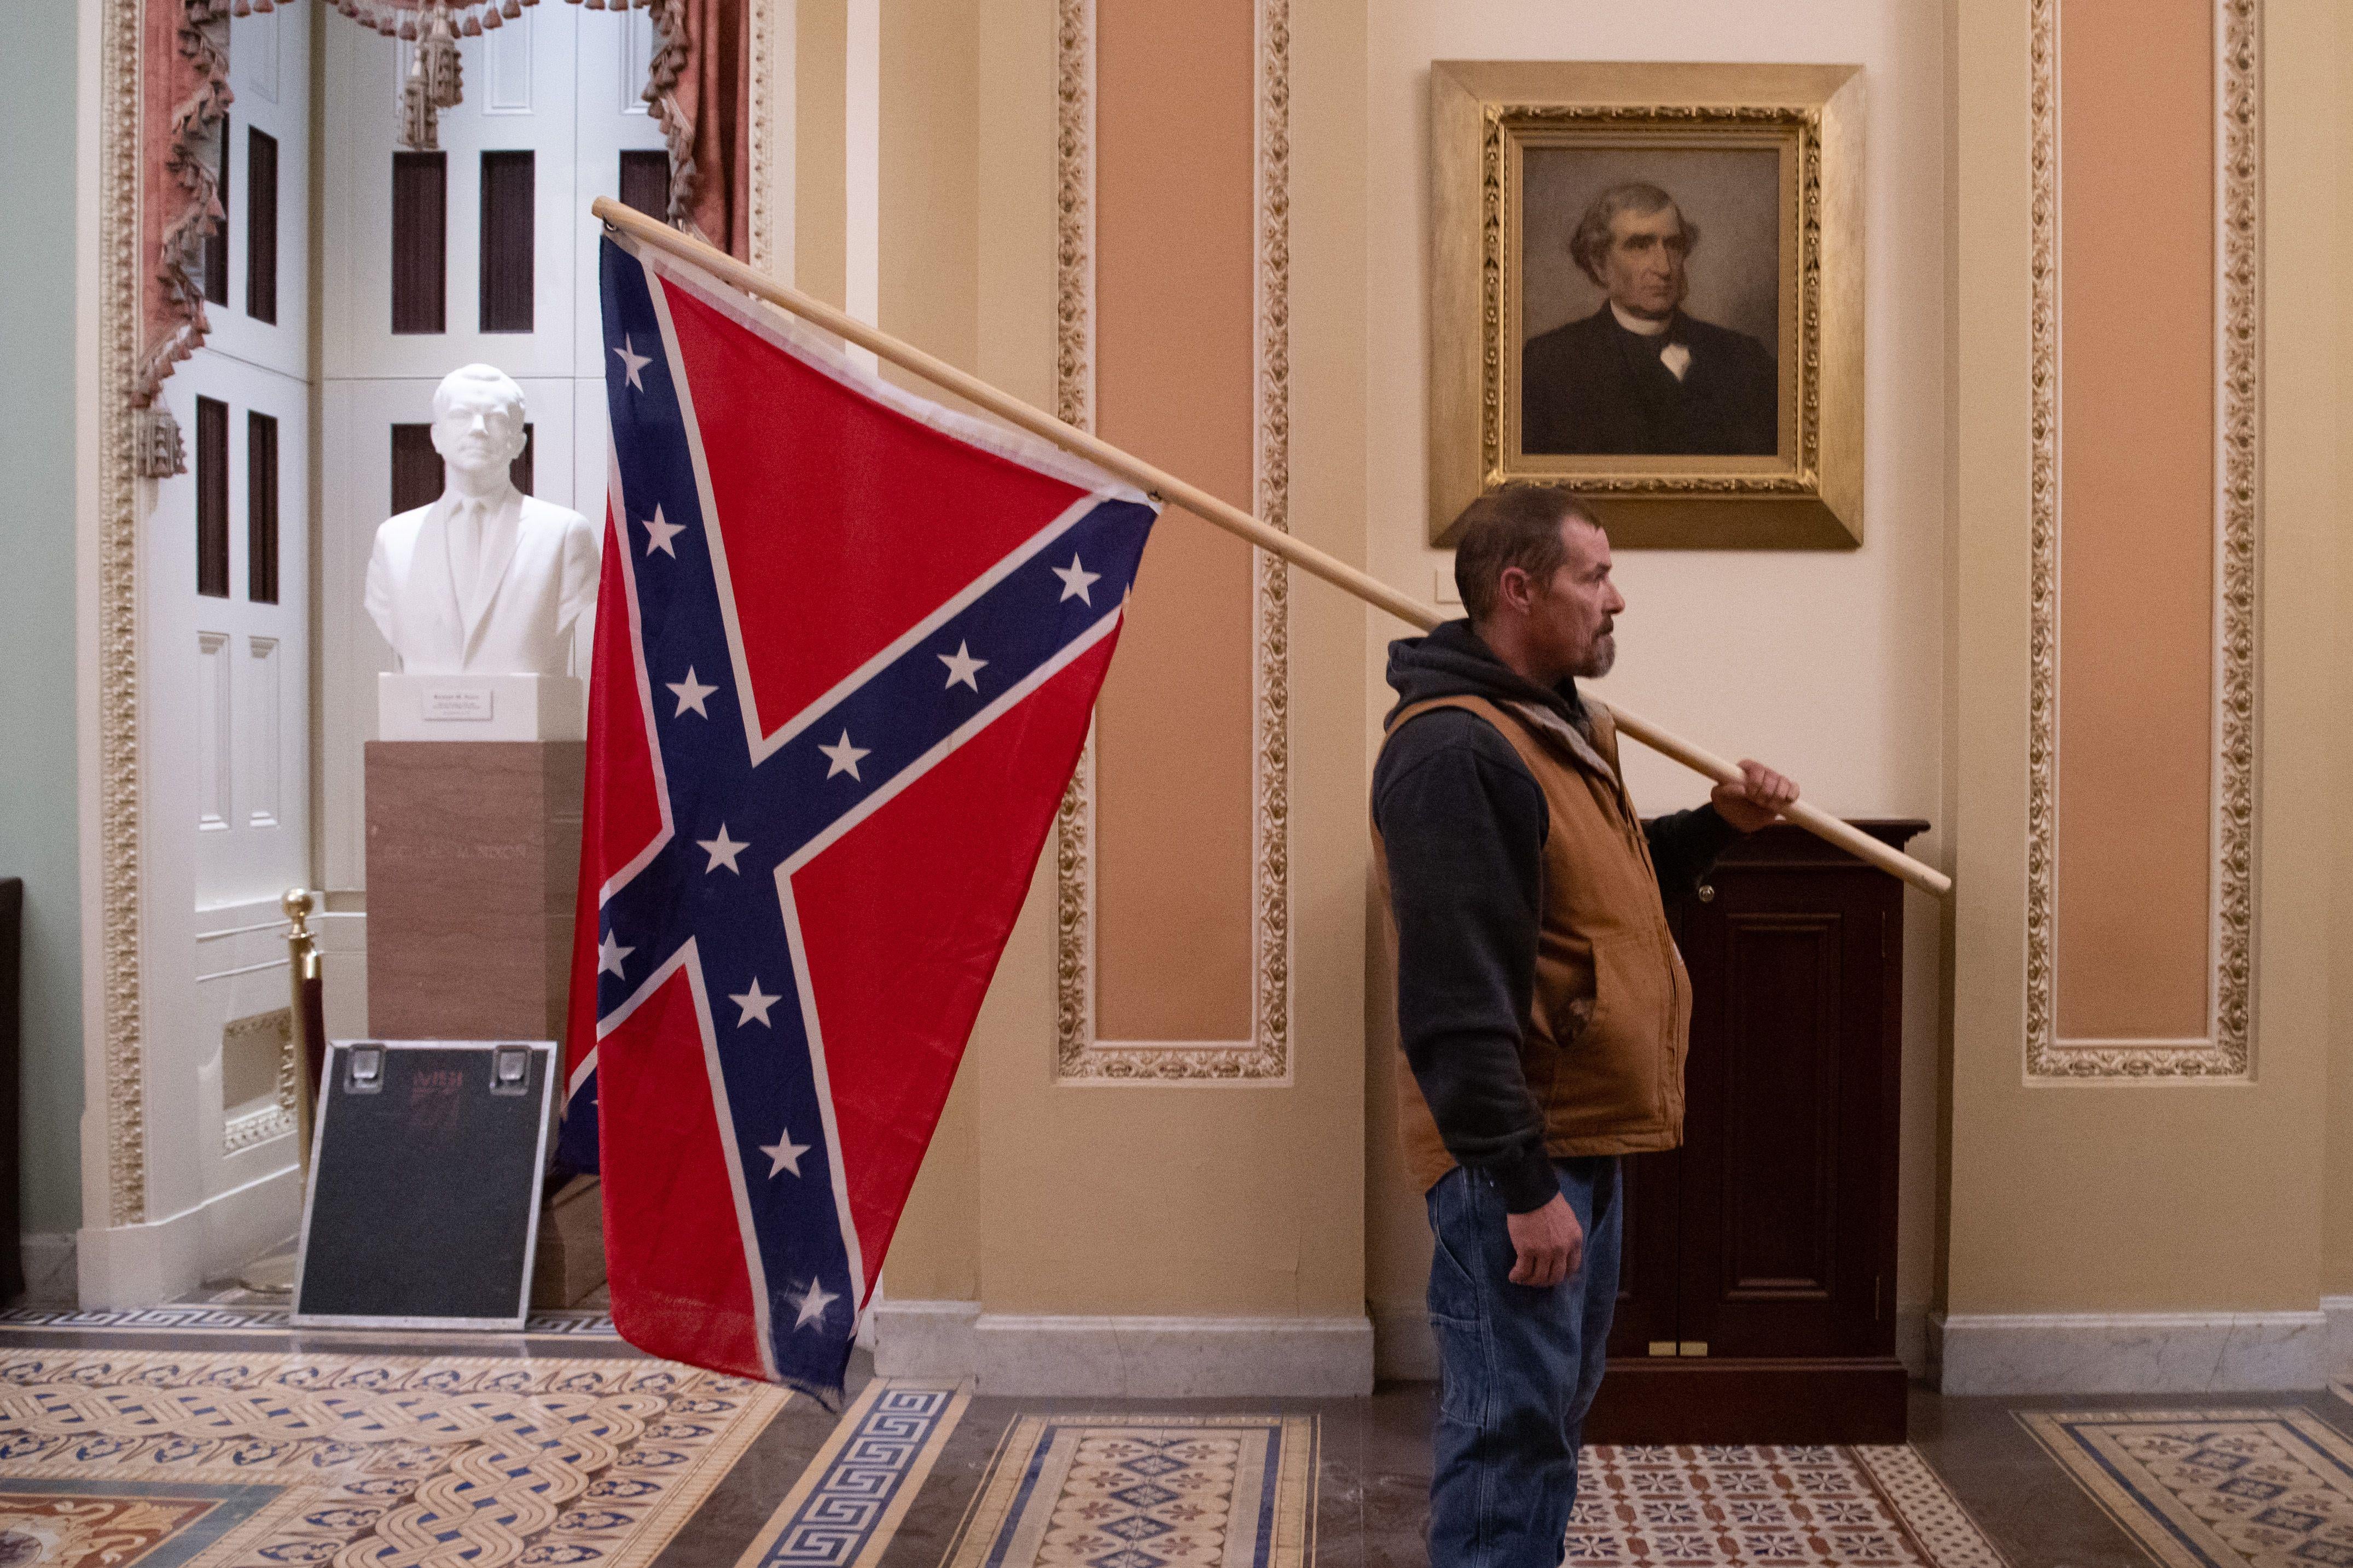 A man holding a Confederate flag stands in front of a portrait of an old member of Congress in a hallway of the Capitol.